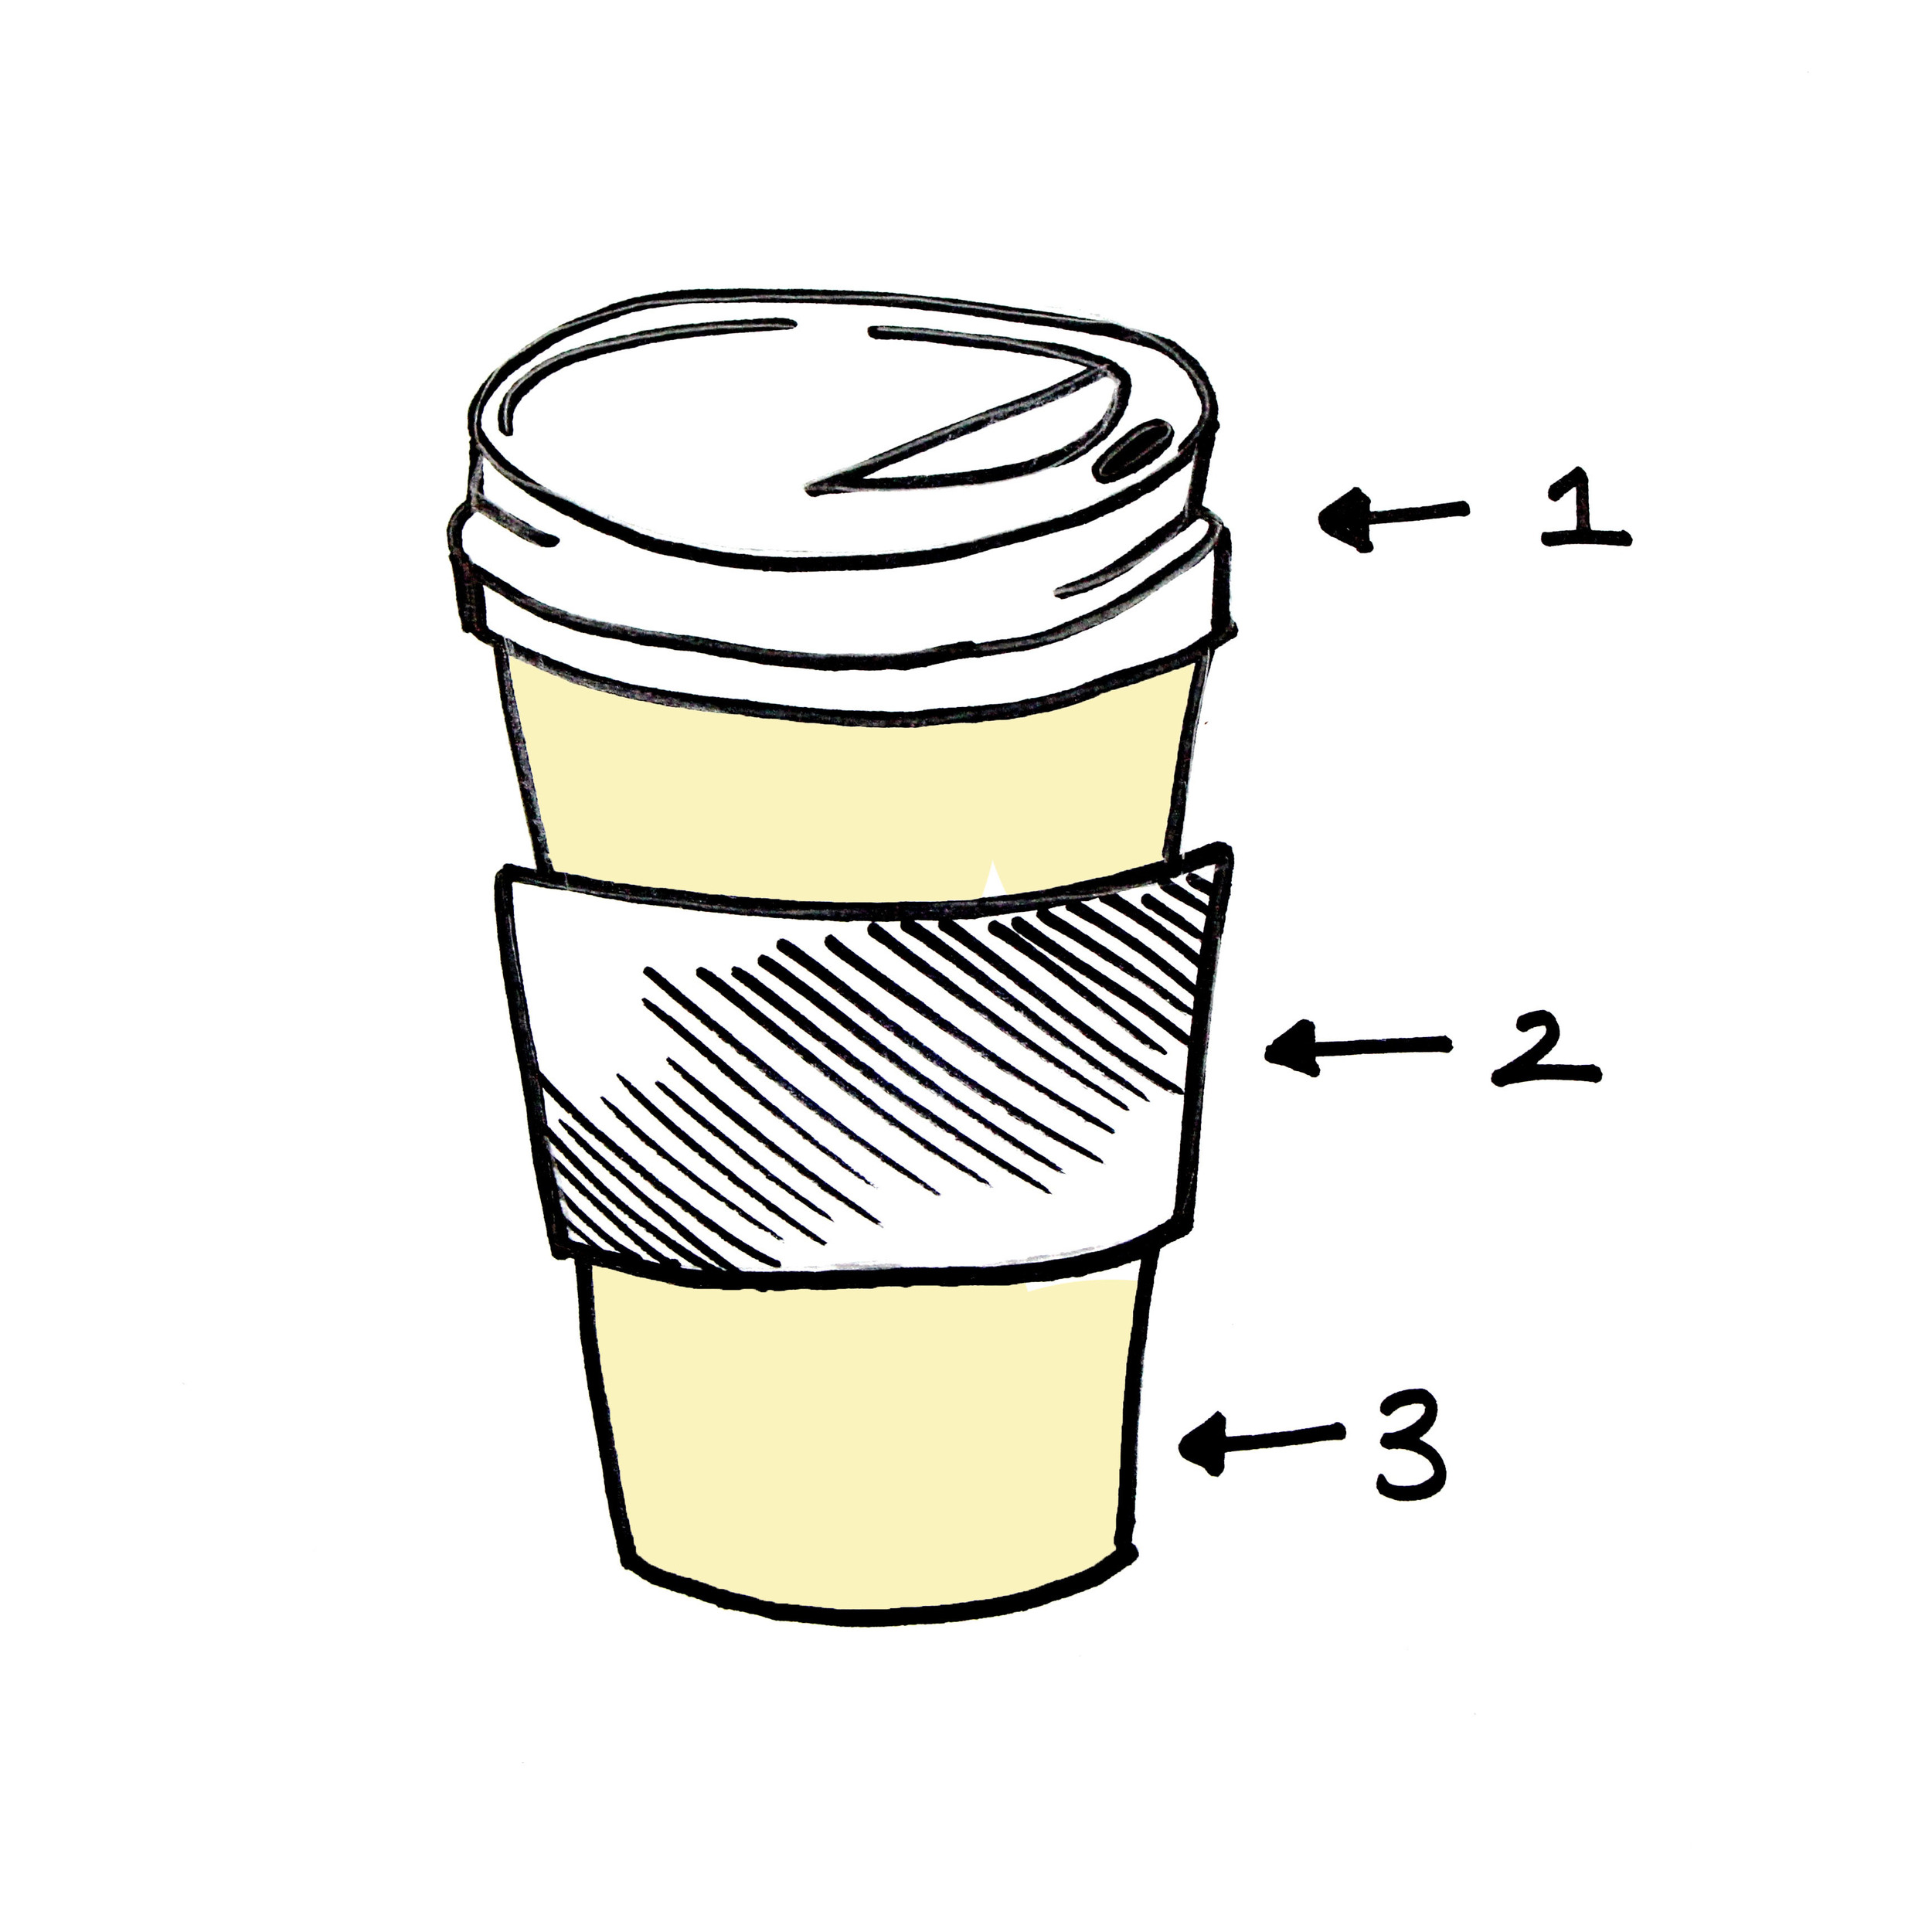 Anatomy of a To Go Cup — The Little Black Coffee Cup